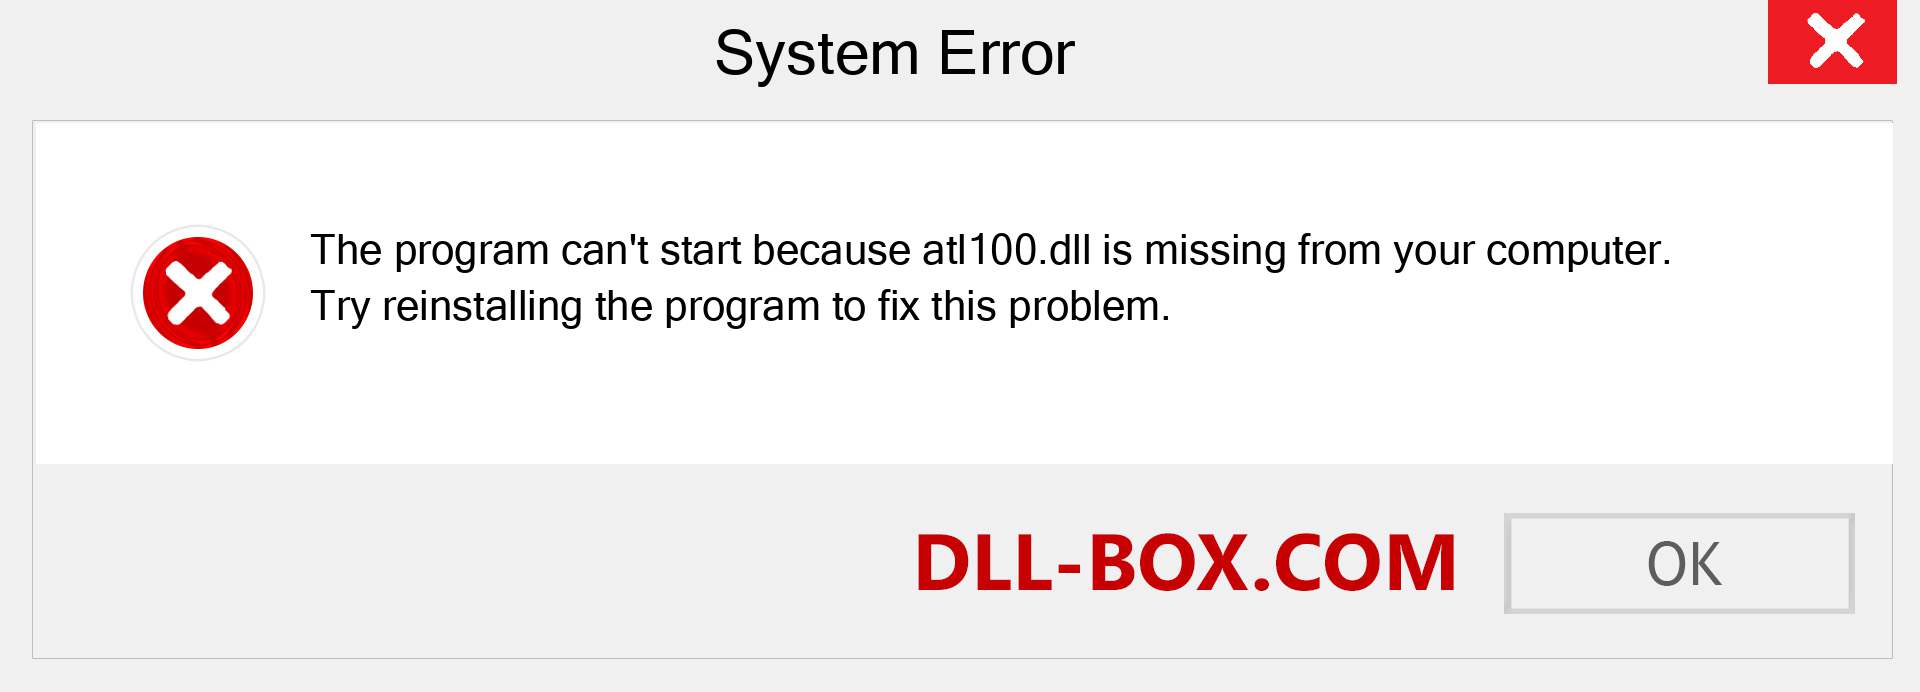  atl100.dll file is missing?. Download for Windows 7, 8, 10 - Fix  atl100 dll Missing Error on Windows, photos, images